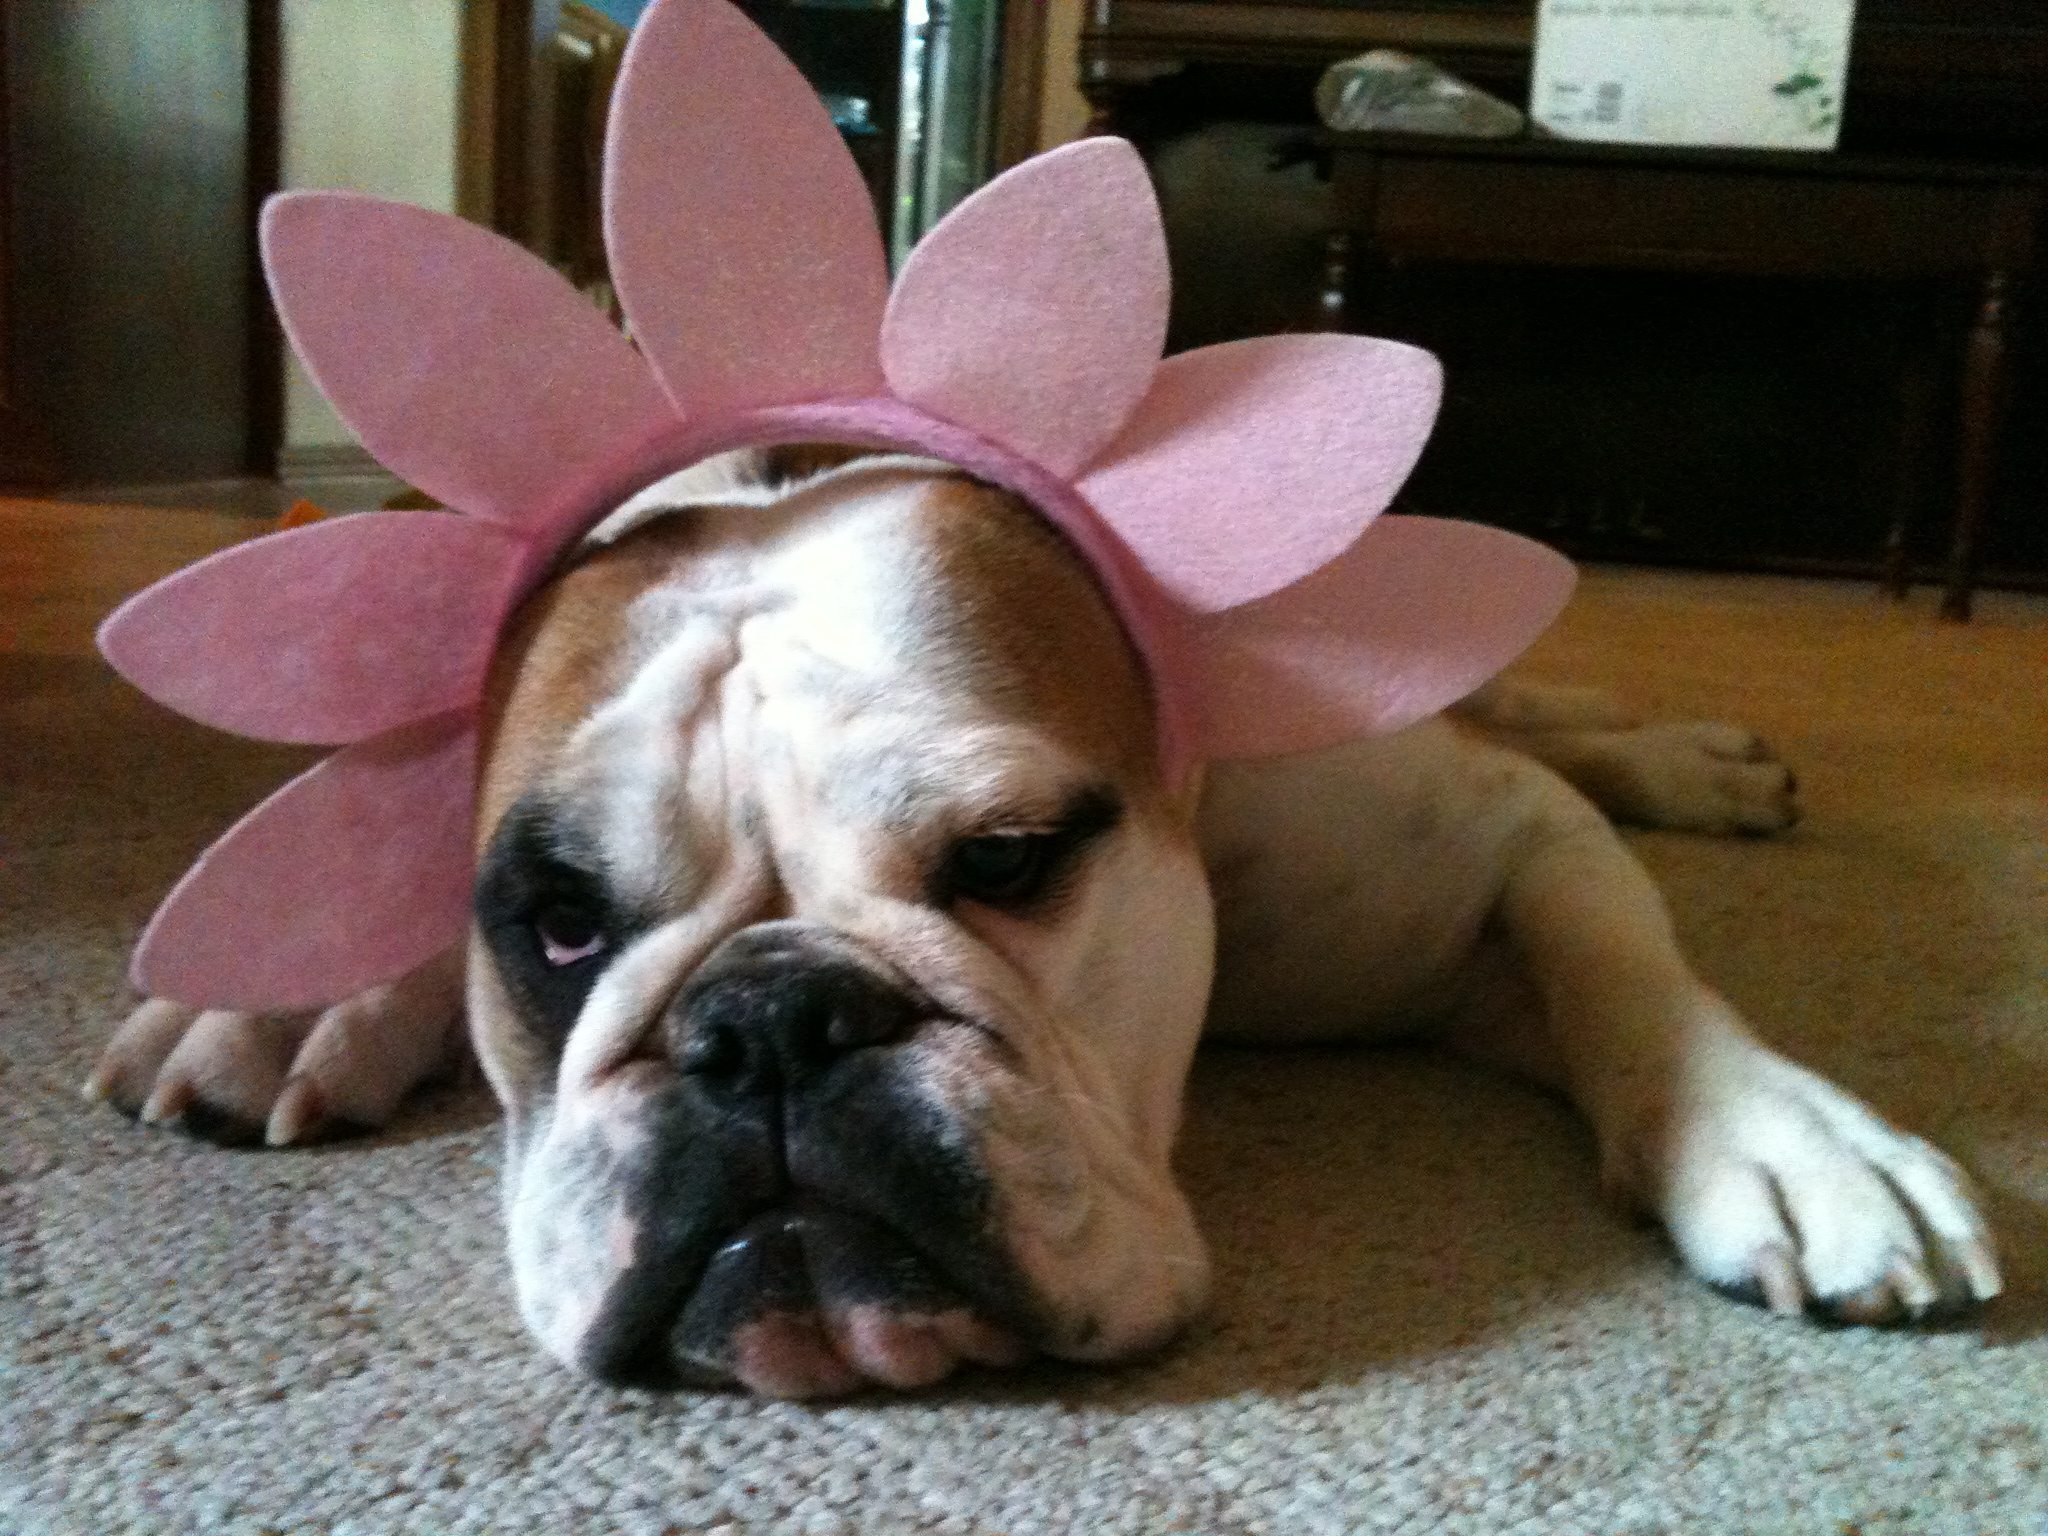 Dooley as a flower for spring